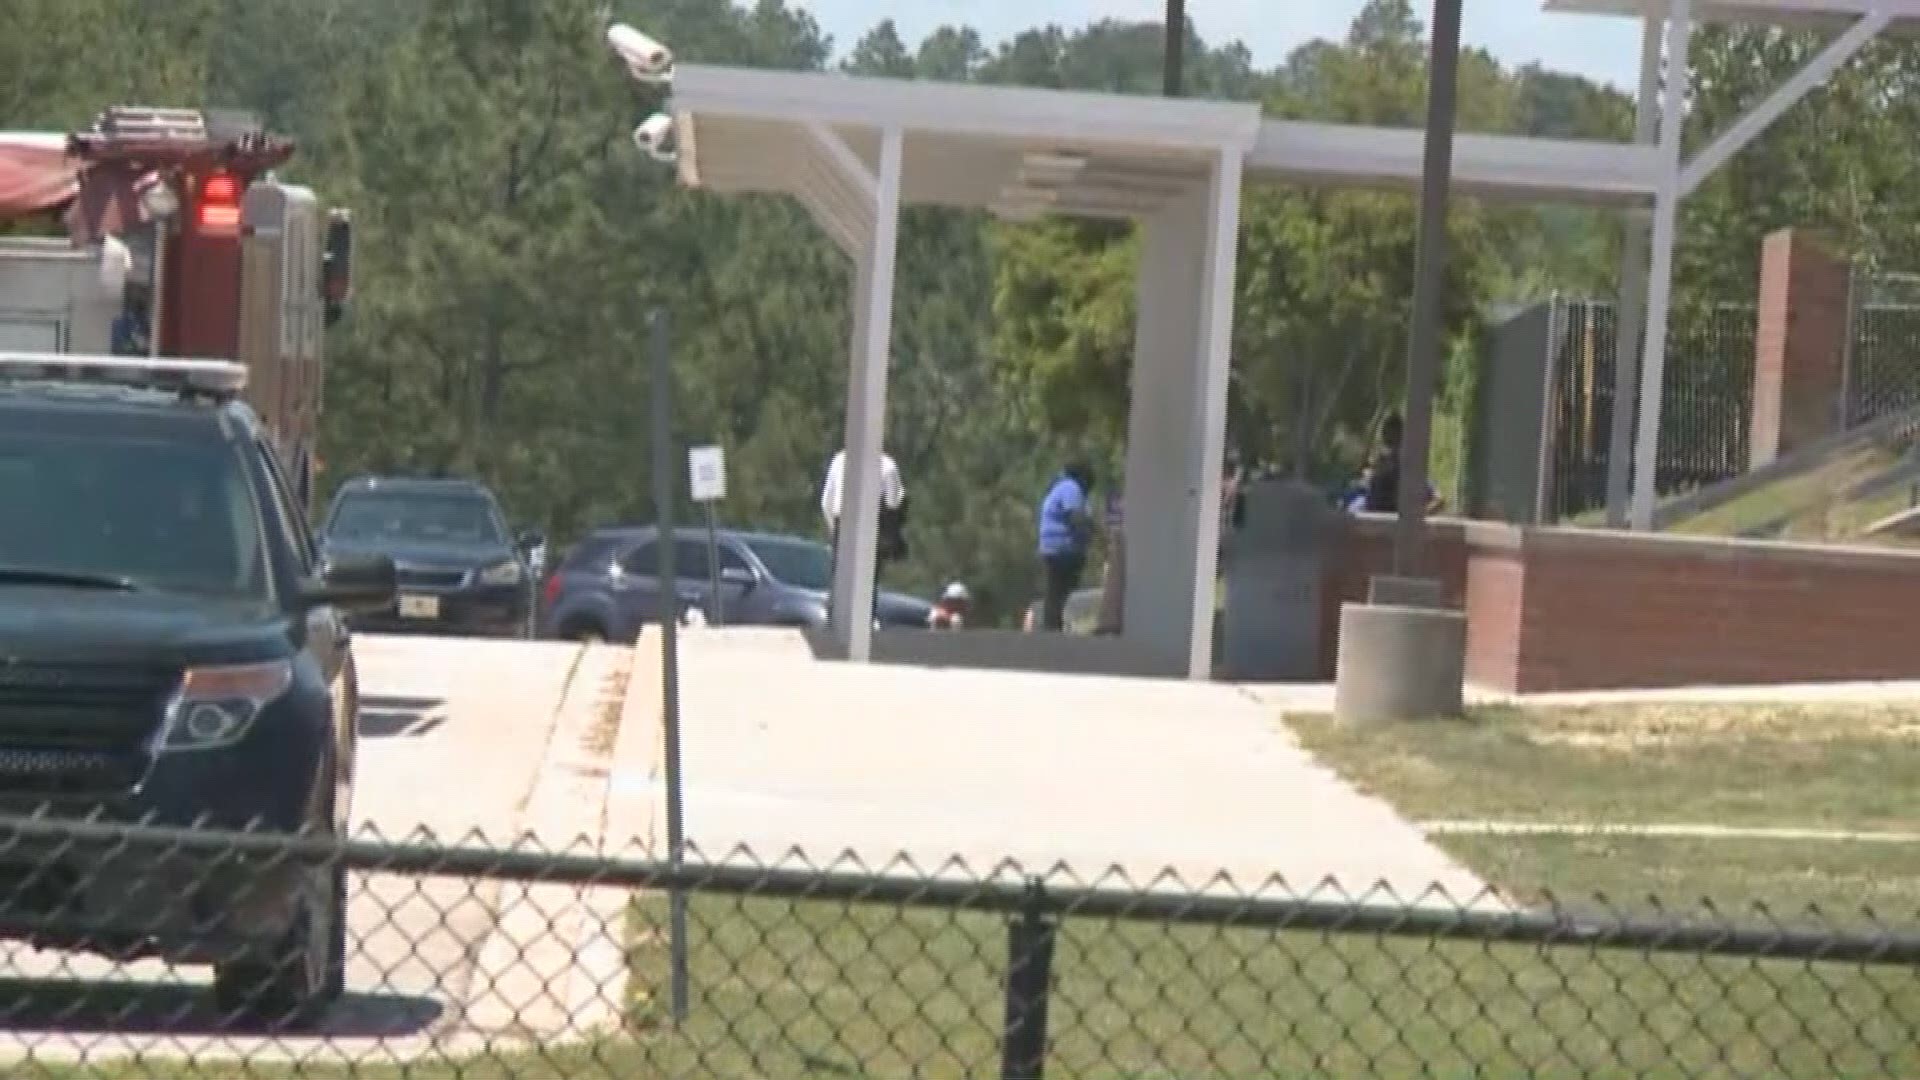 Fire officials had to respond to a situation at Ridge View High School Wednesday afternoon.